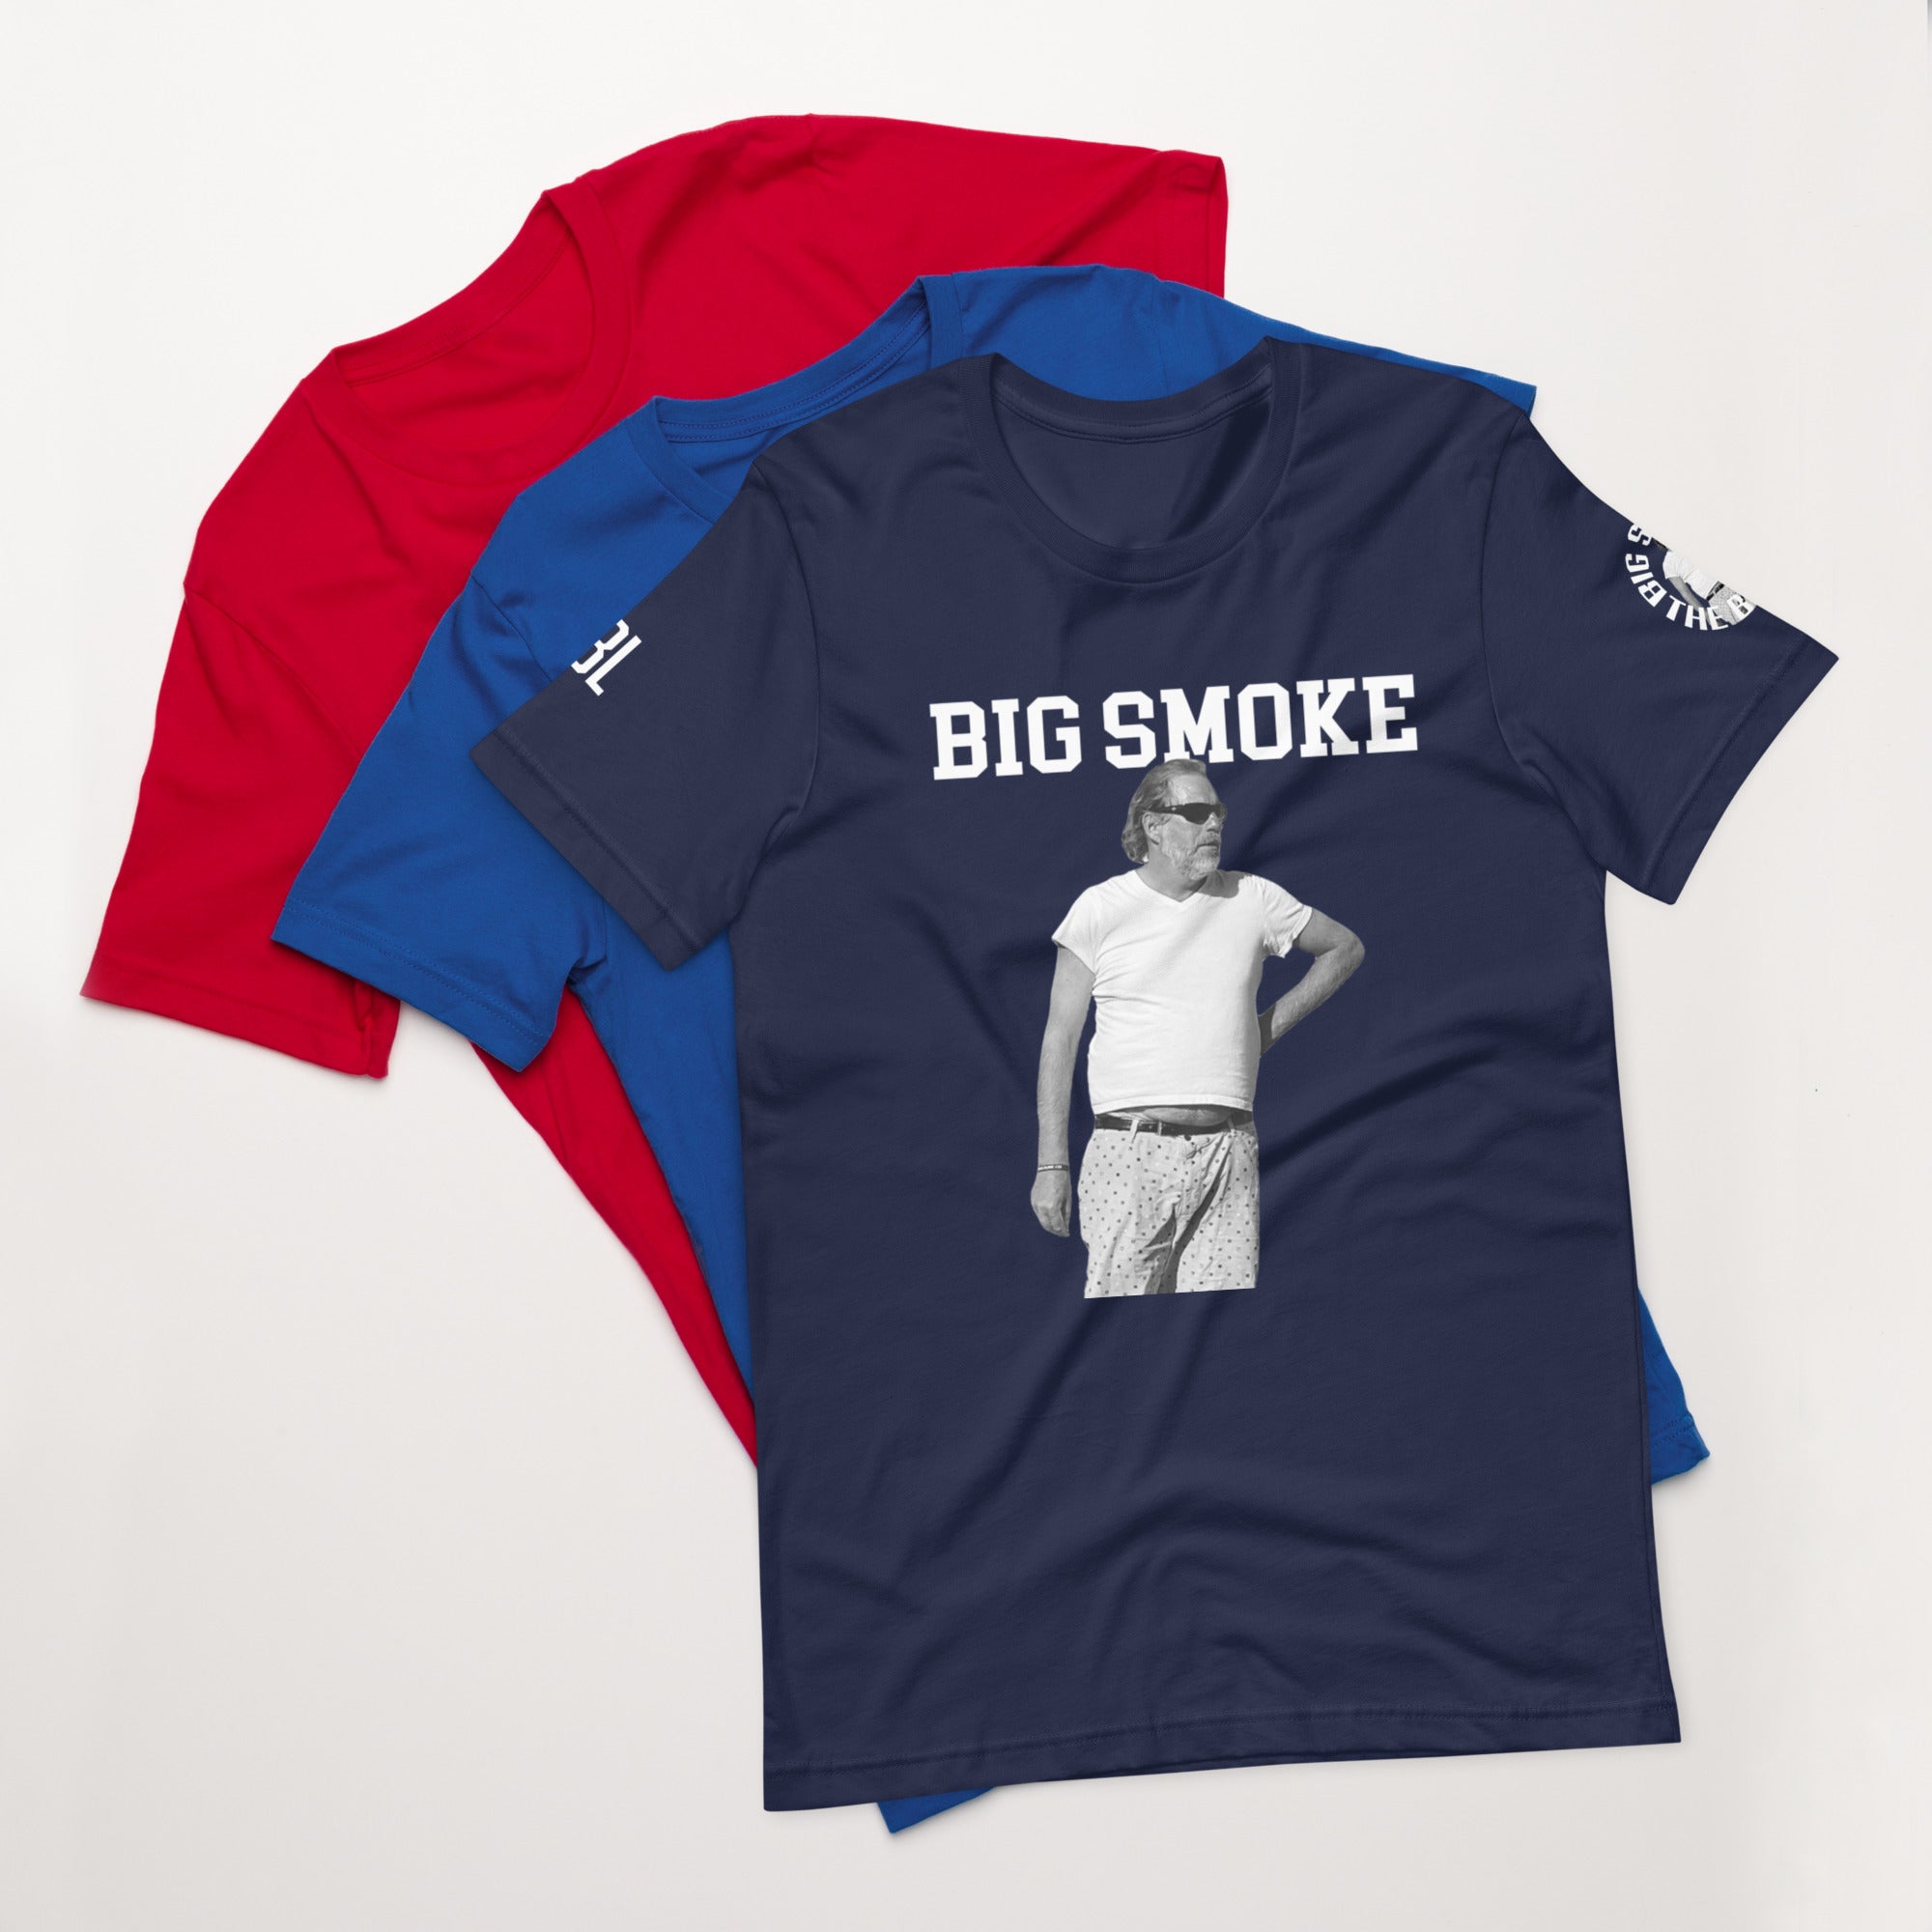 BigSmoke - The T-Shirt (#GBL LIMITED EDITION)